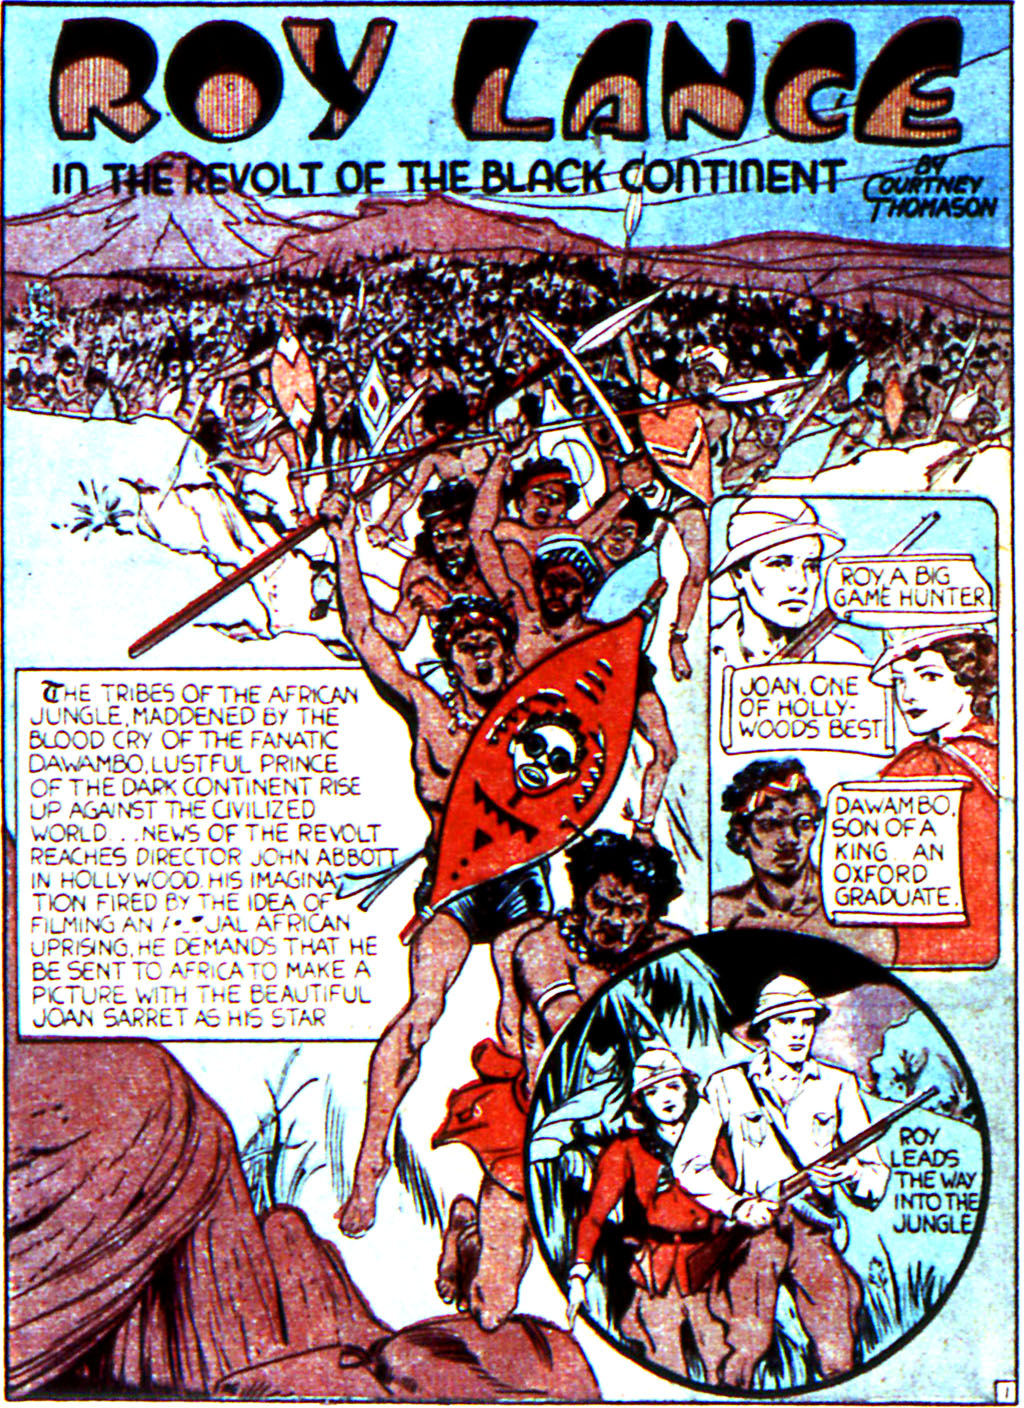 splash page of roy lance from jungle comics #2